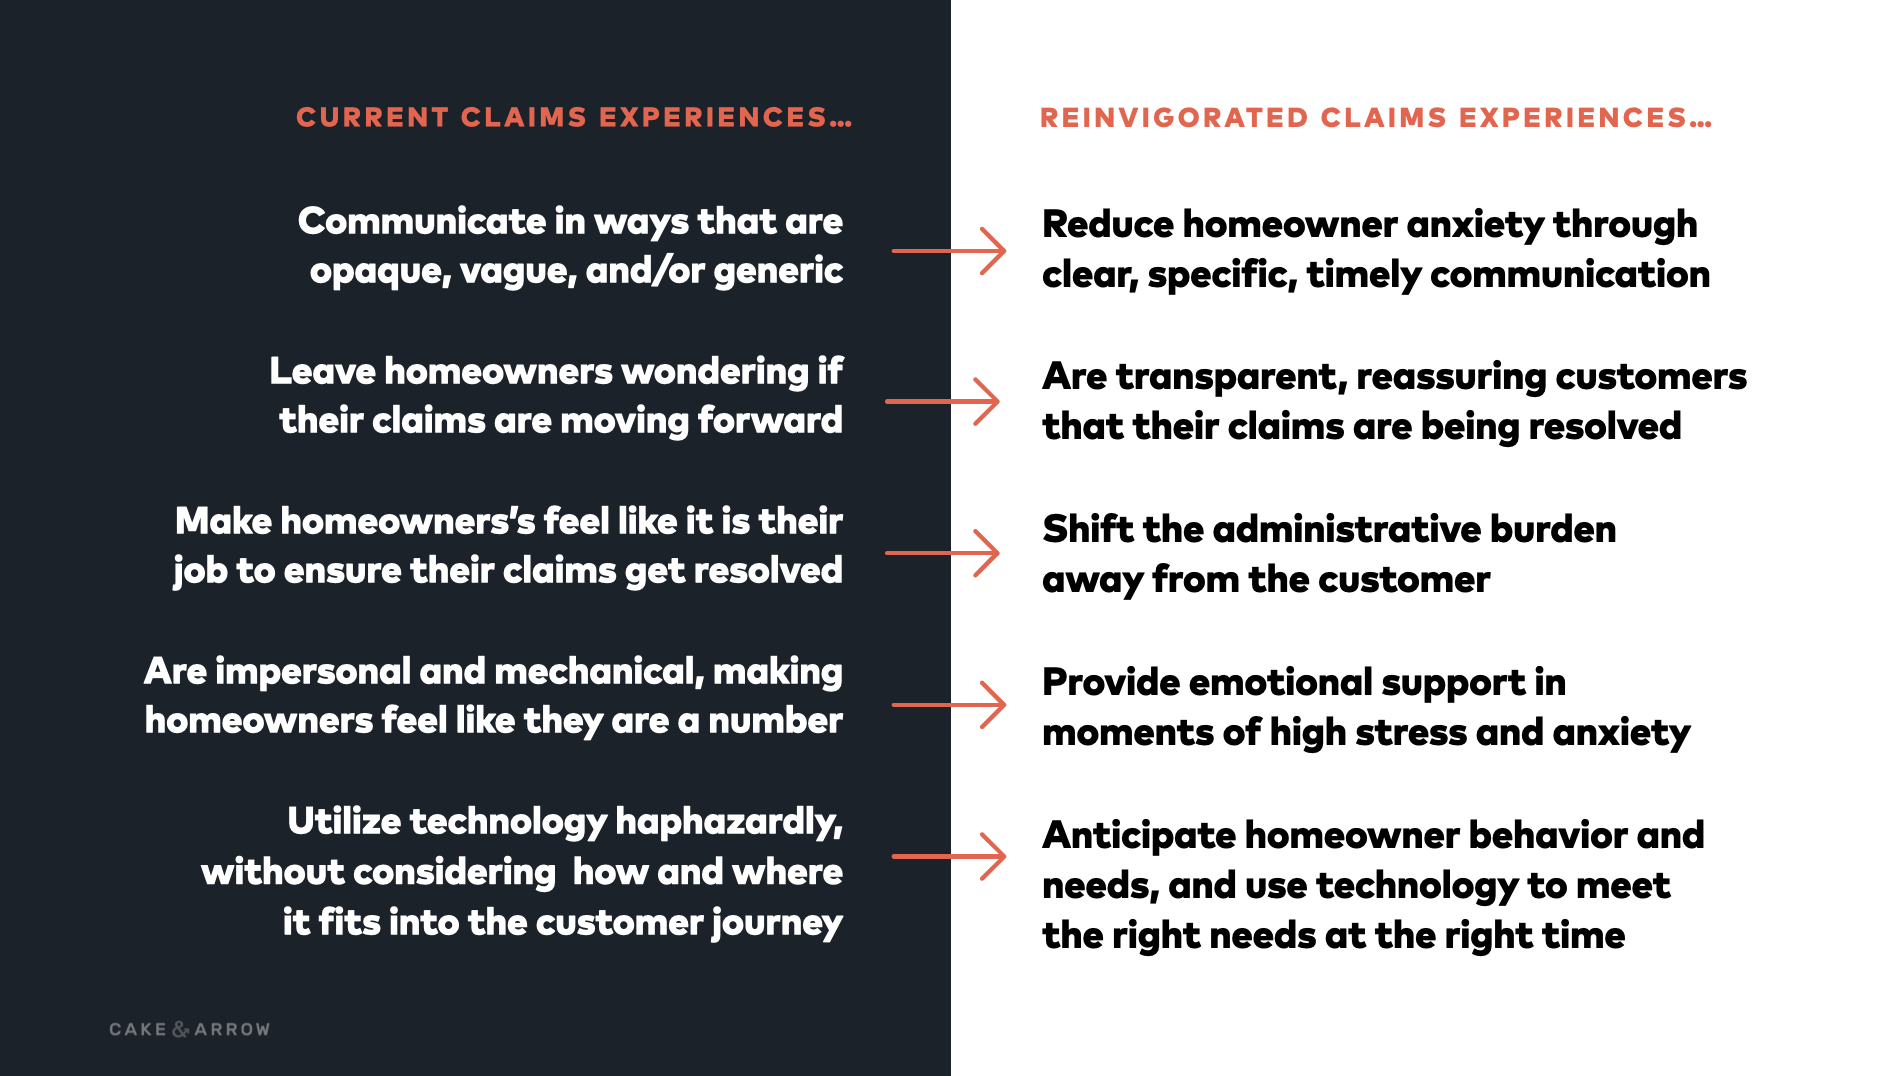 Image showing what the claims is experience is now on one side and ideas for how it might be reinvigorated on the other side to better support homeowners through the climate crisis